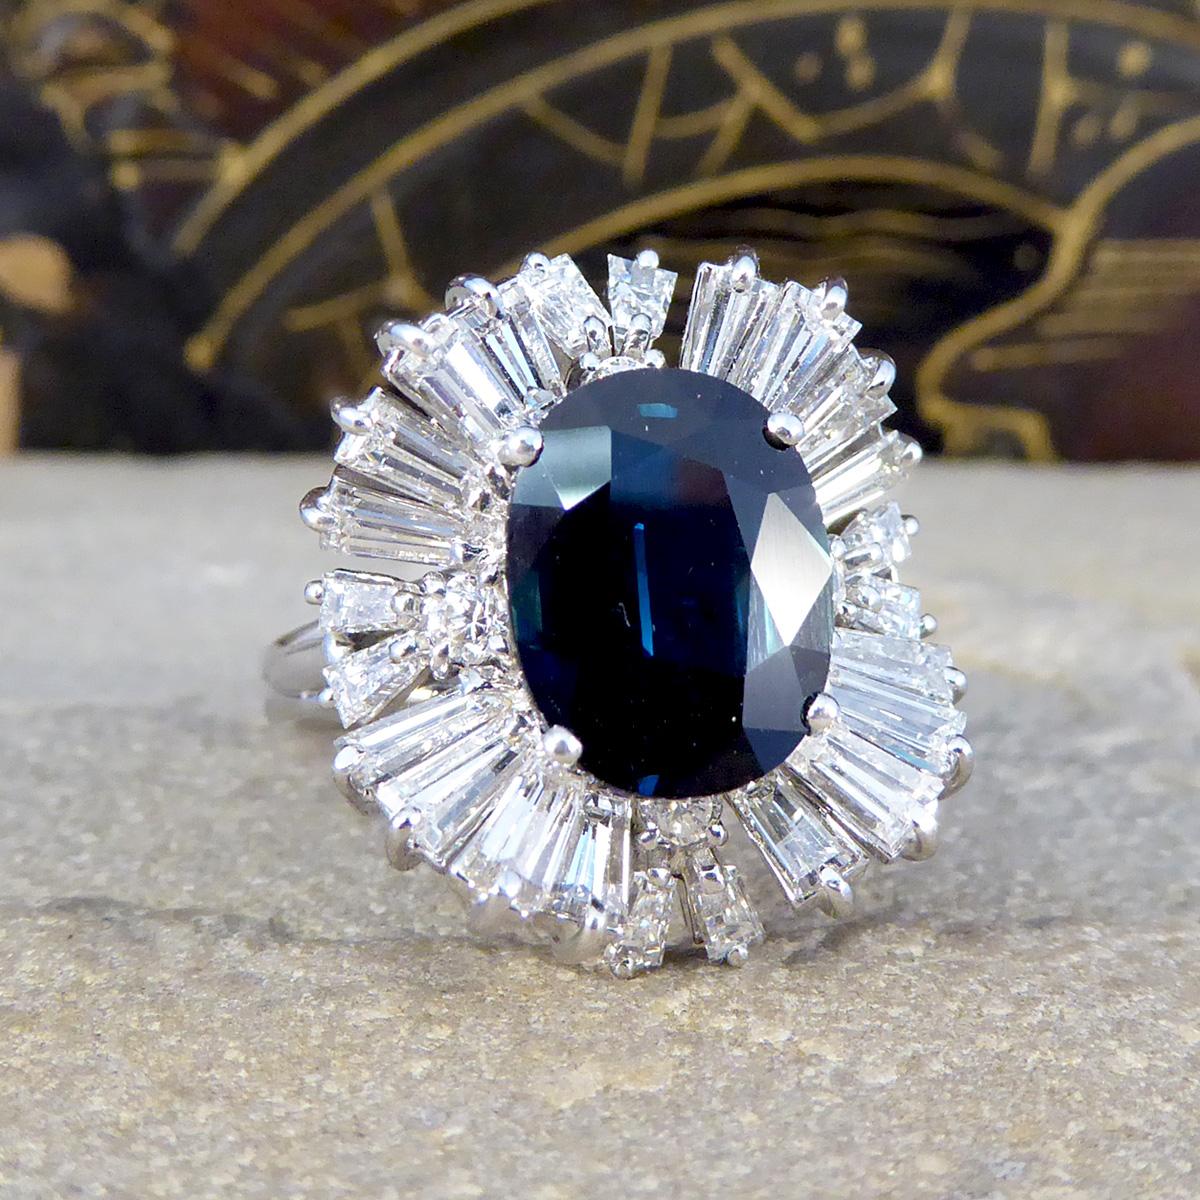 Presenting our Sapphire and Diamond Ballerina cluster ring, a pinnacle of sophistication. This ring boasts a 4.33ct oval cut Sapphire showing a deep and dark blue hue, enveloped by tapered baguette diamonds weighing a total of approximately 2.20ct